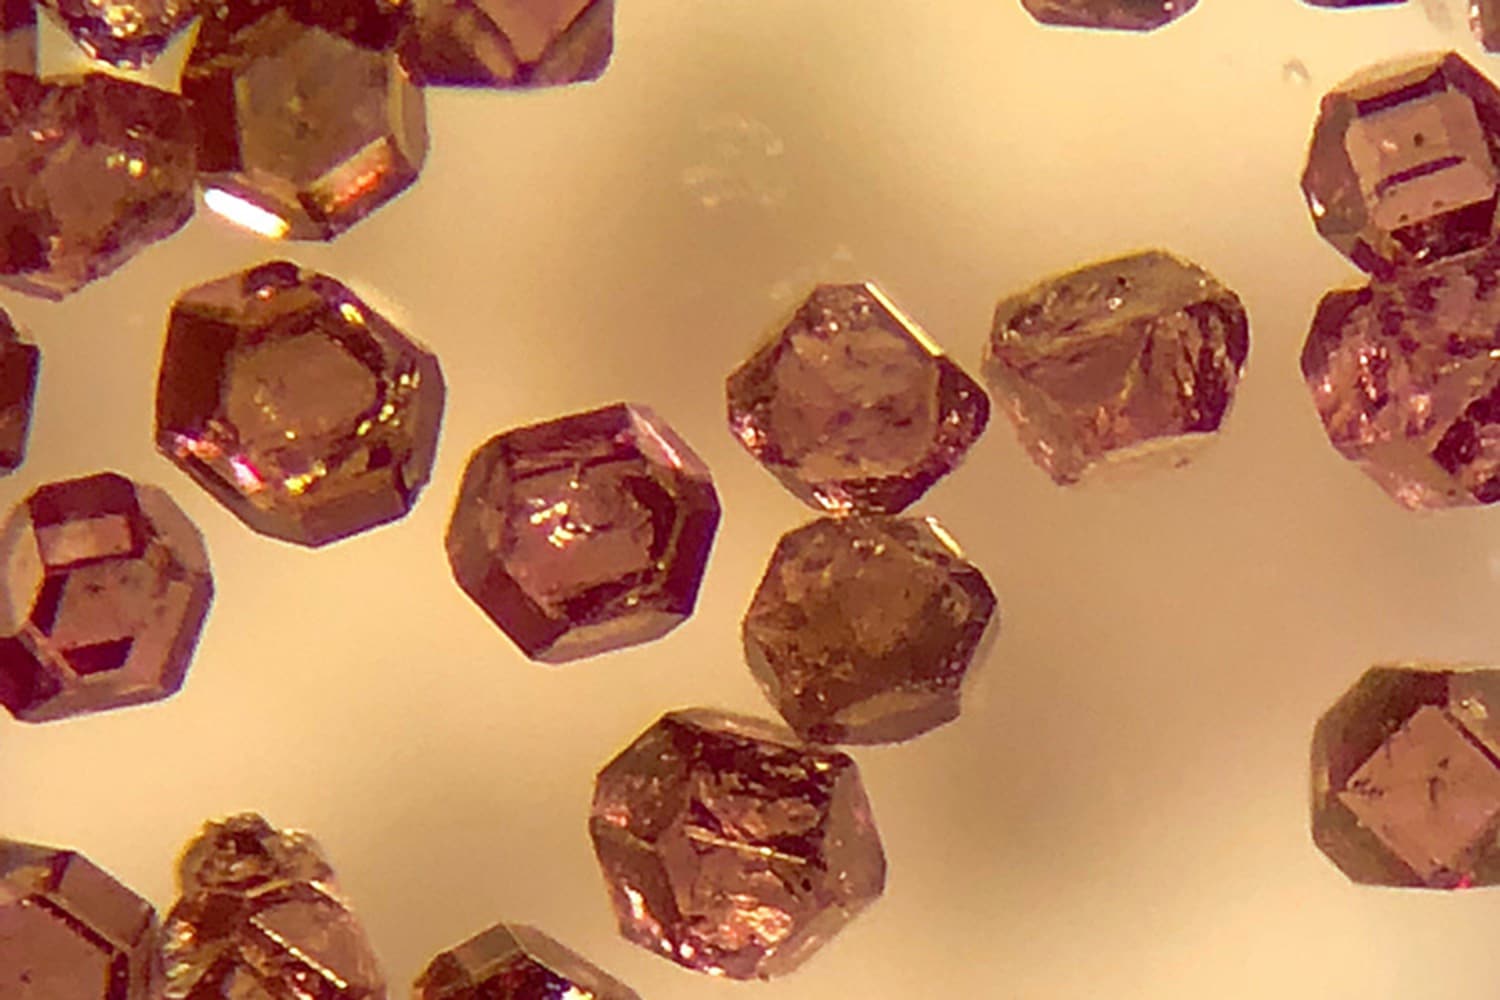 The microdiamonds used as biological tracers are about 200 microns across, less than one-hundredth of an inch